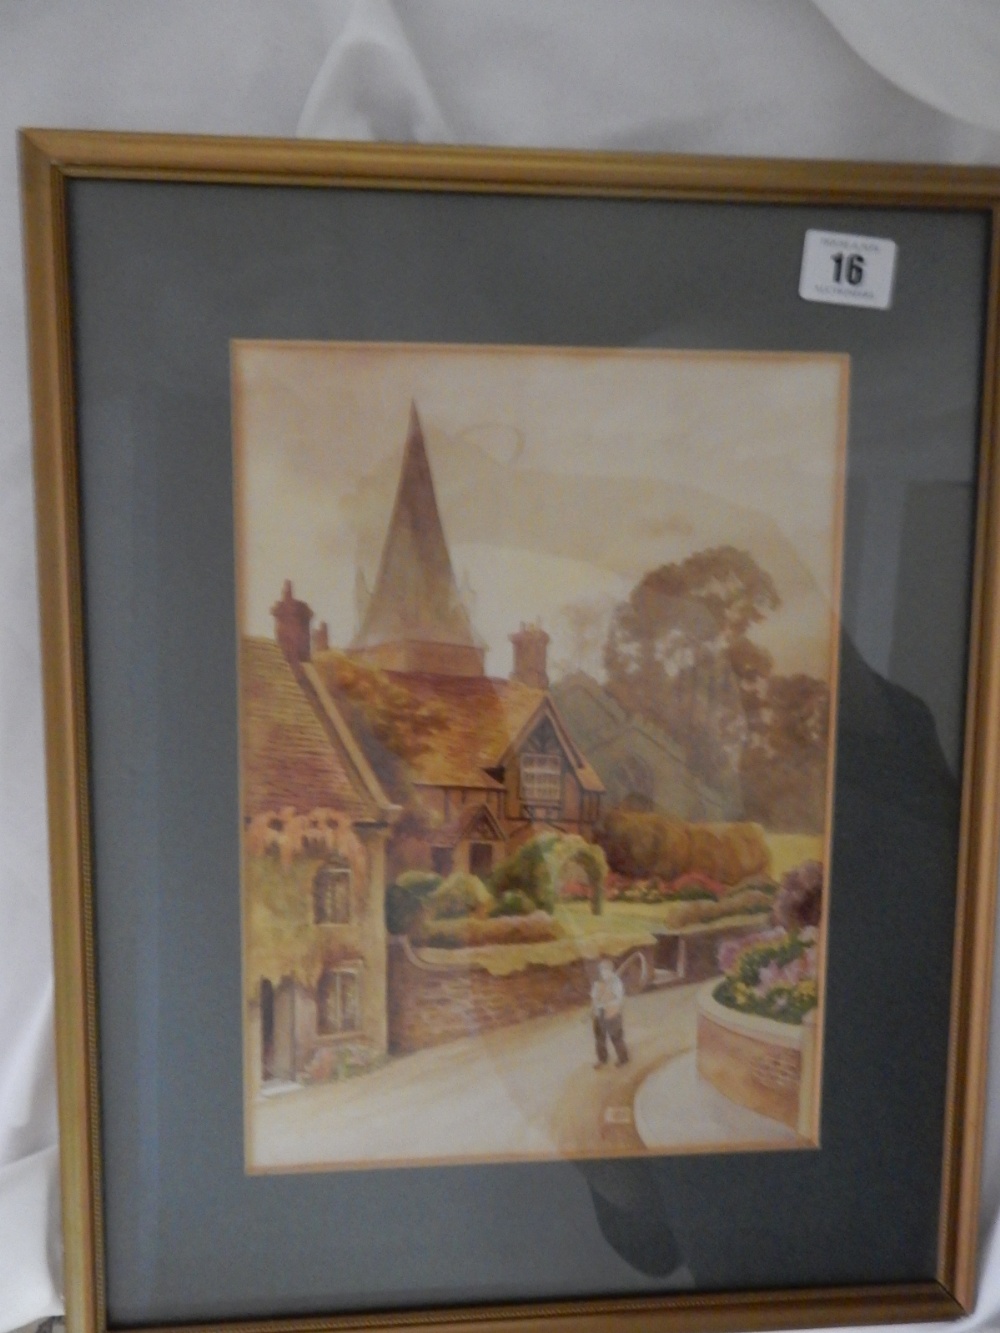 H. Cartlidge. Two watercolours - Street scenes with figures, mounted, framed and glazed - 11in. x